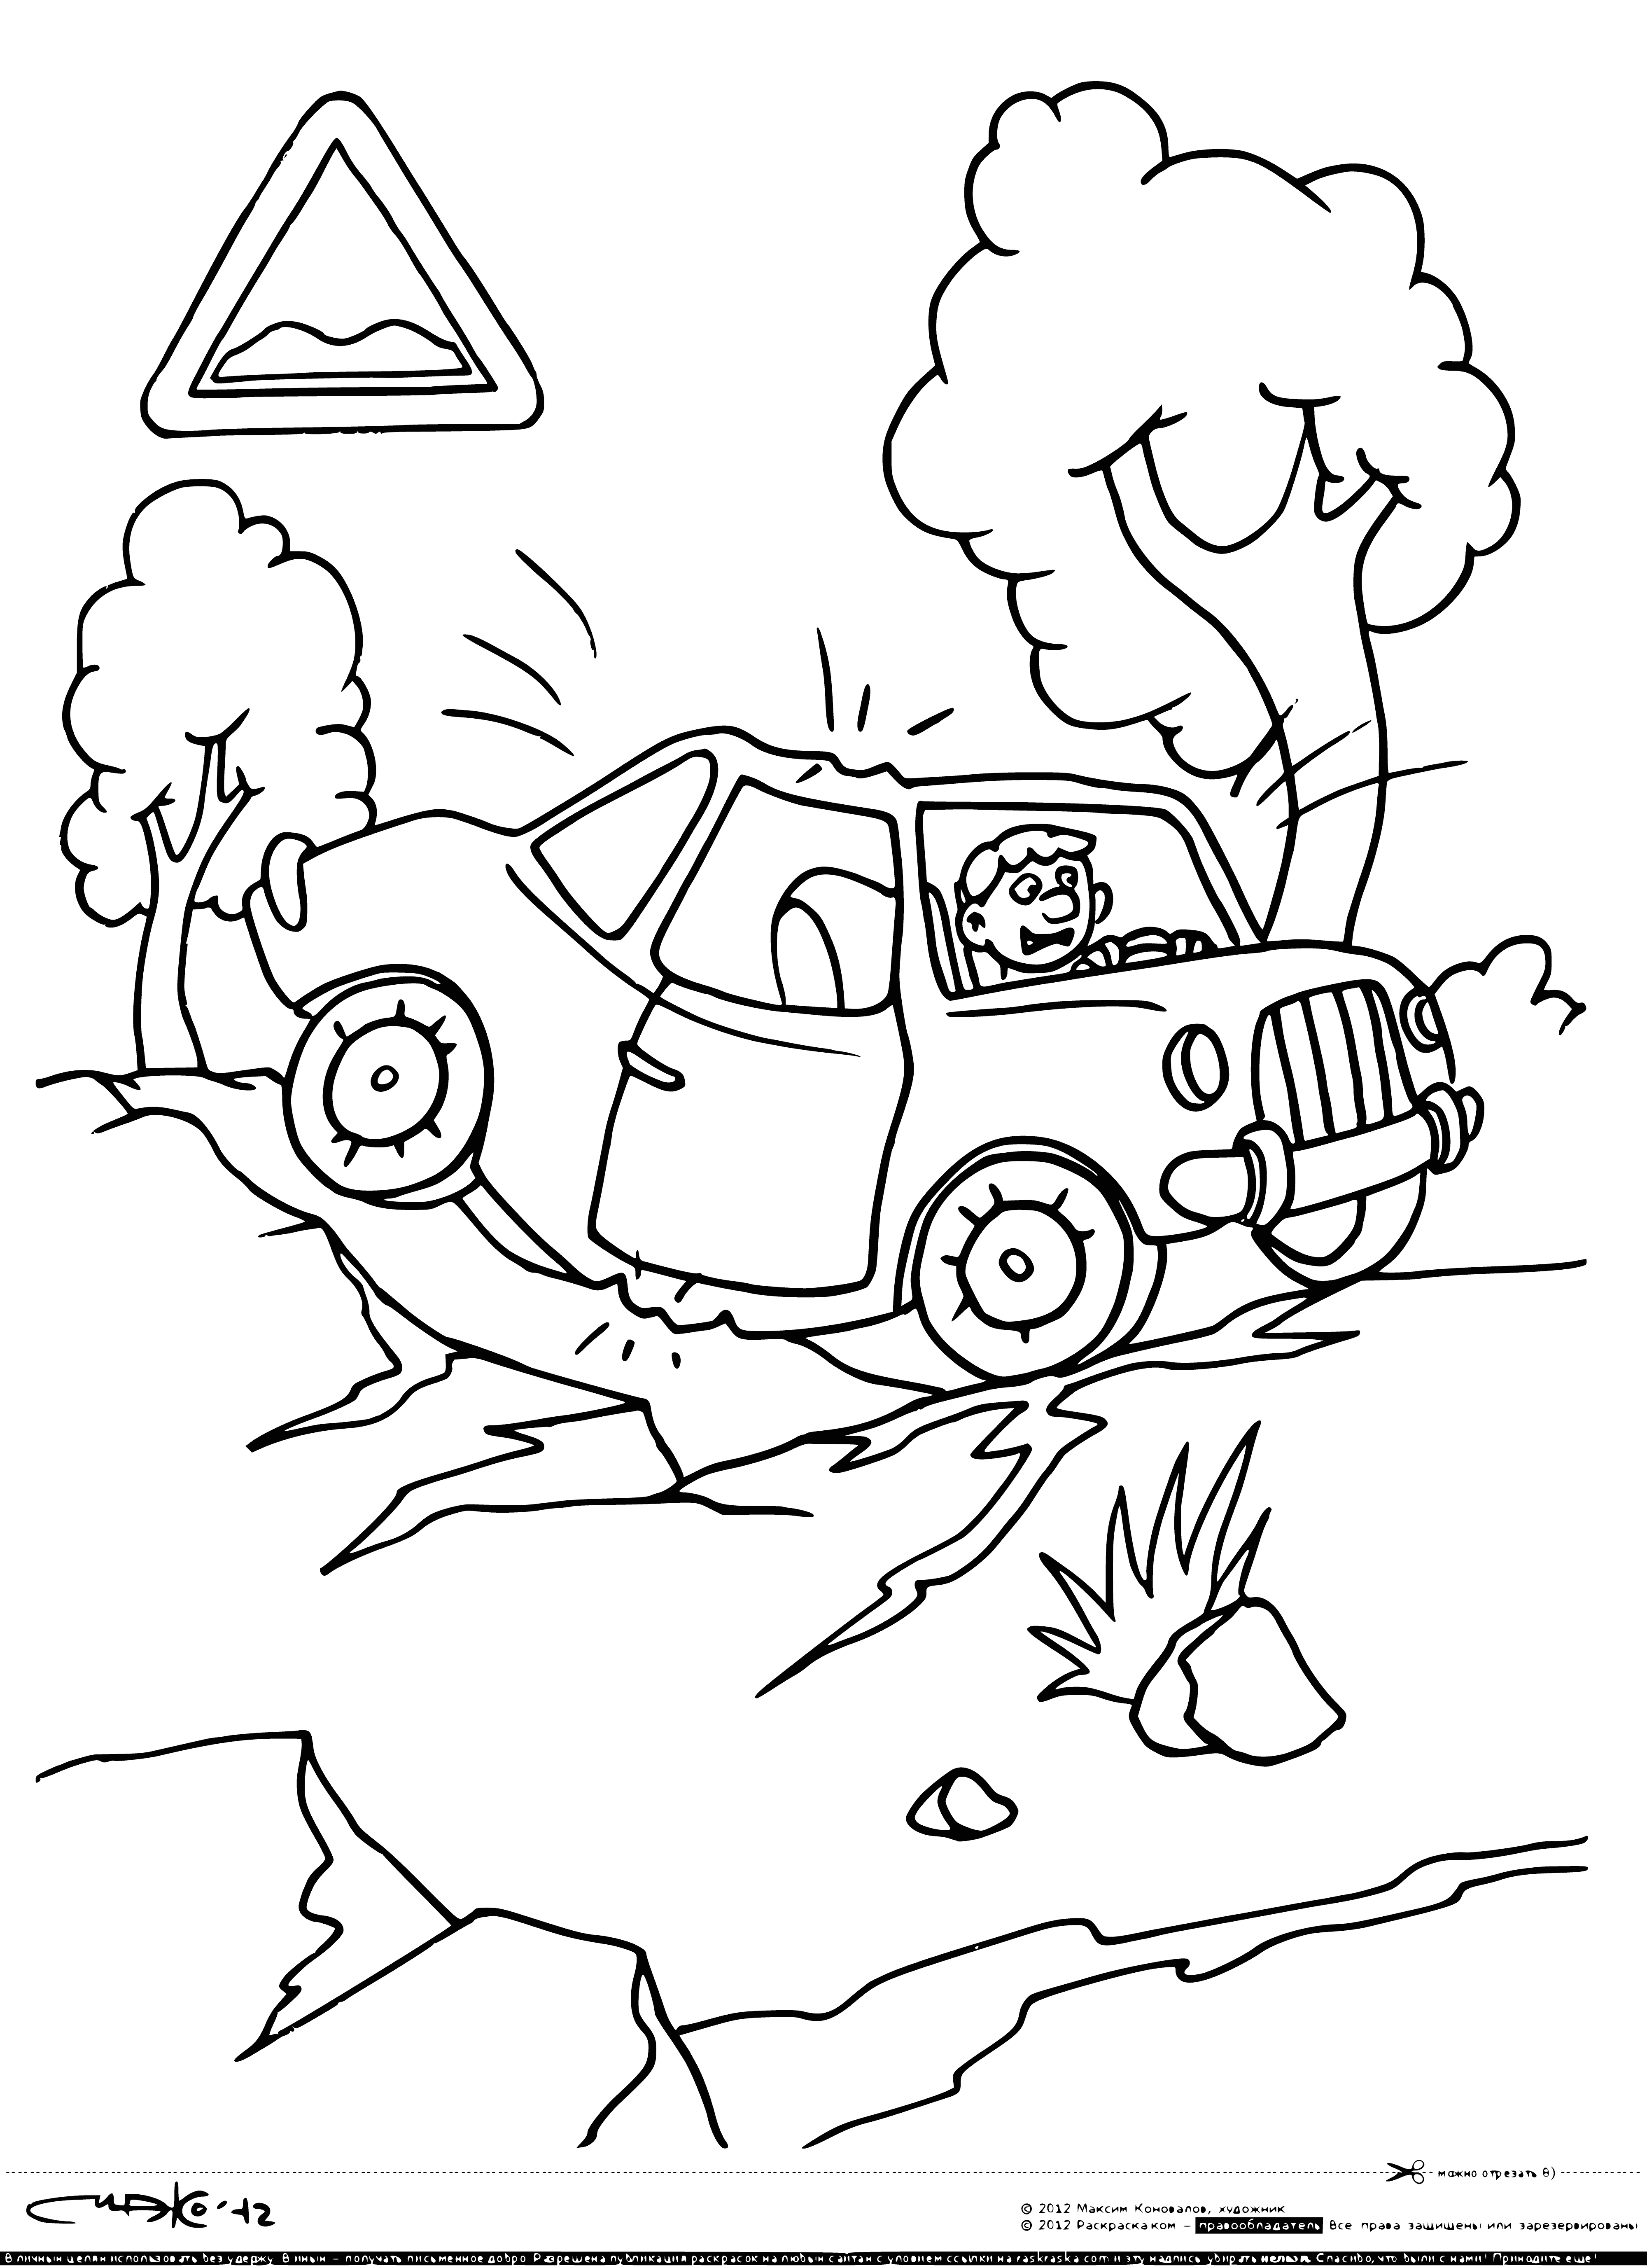 coloring page: Drivers warned of bumpy road ahead: "rough road" sign cautions to slow down.